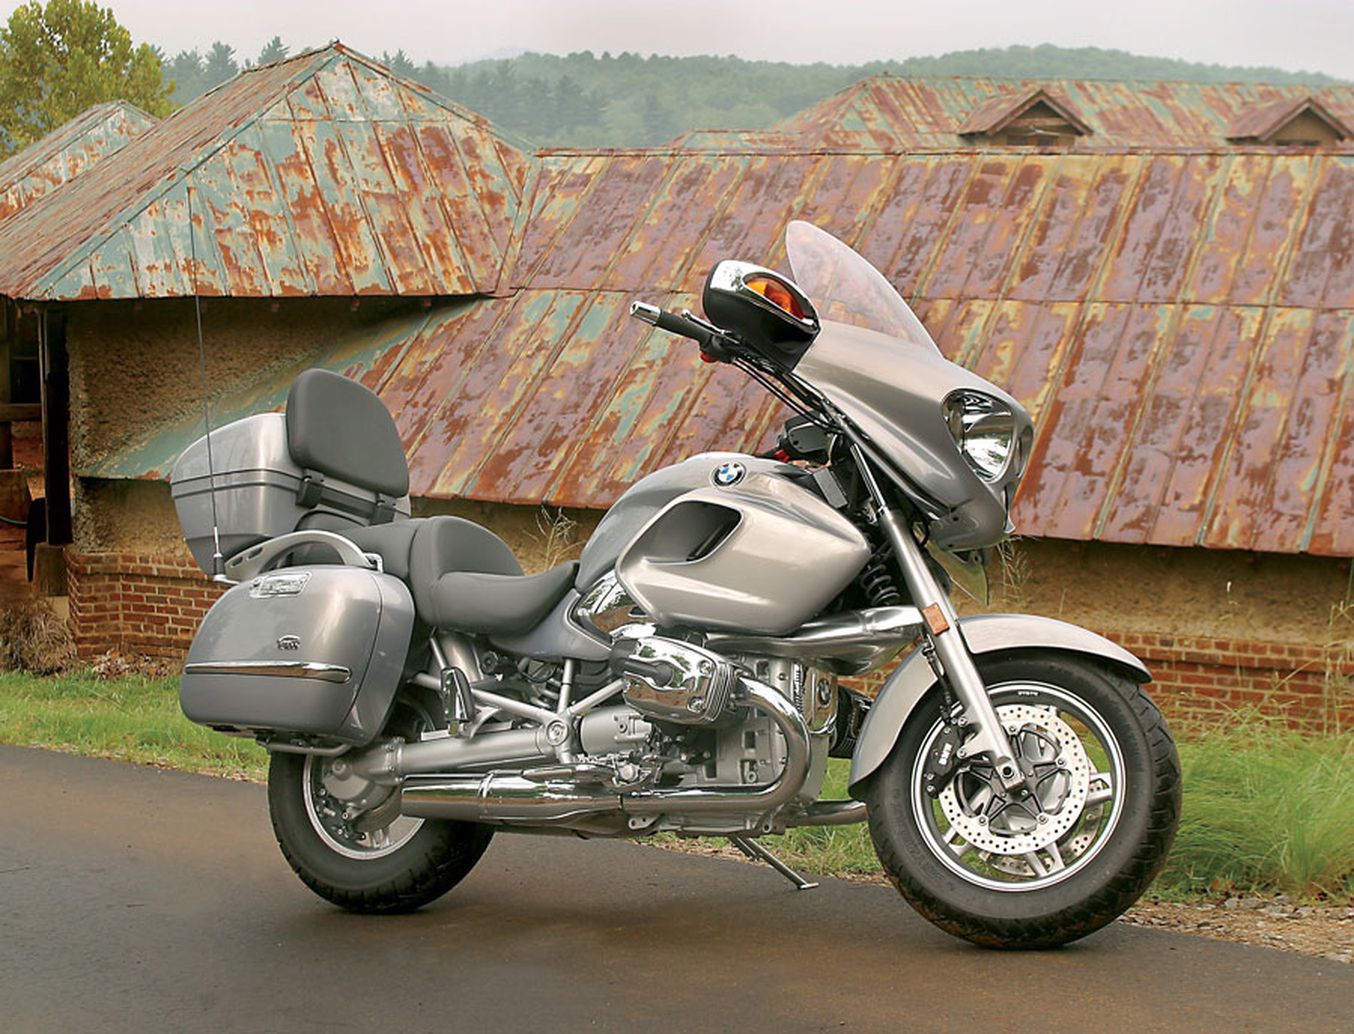 BMW motorcycle 1200 CLC